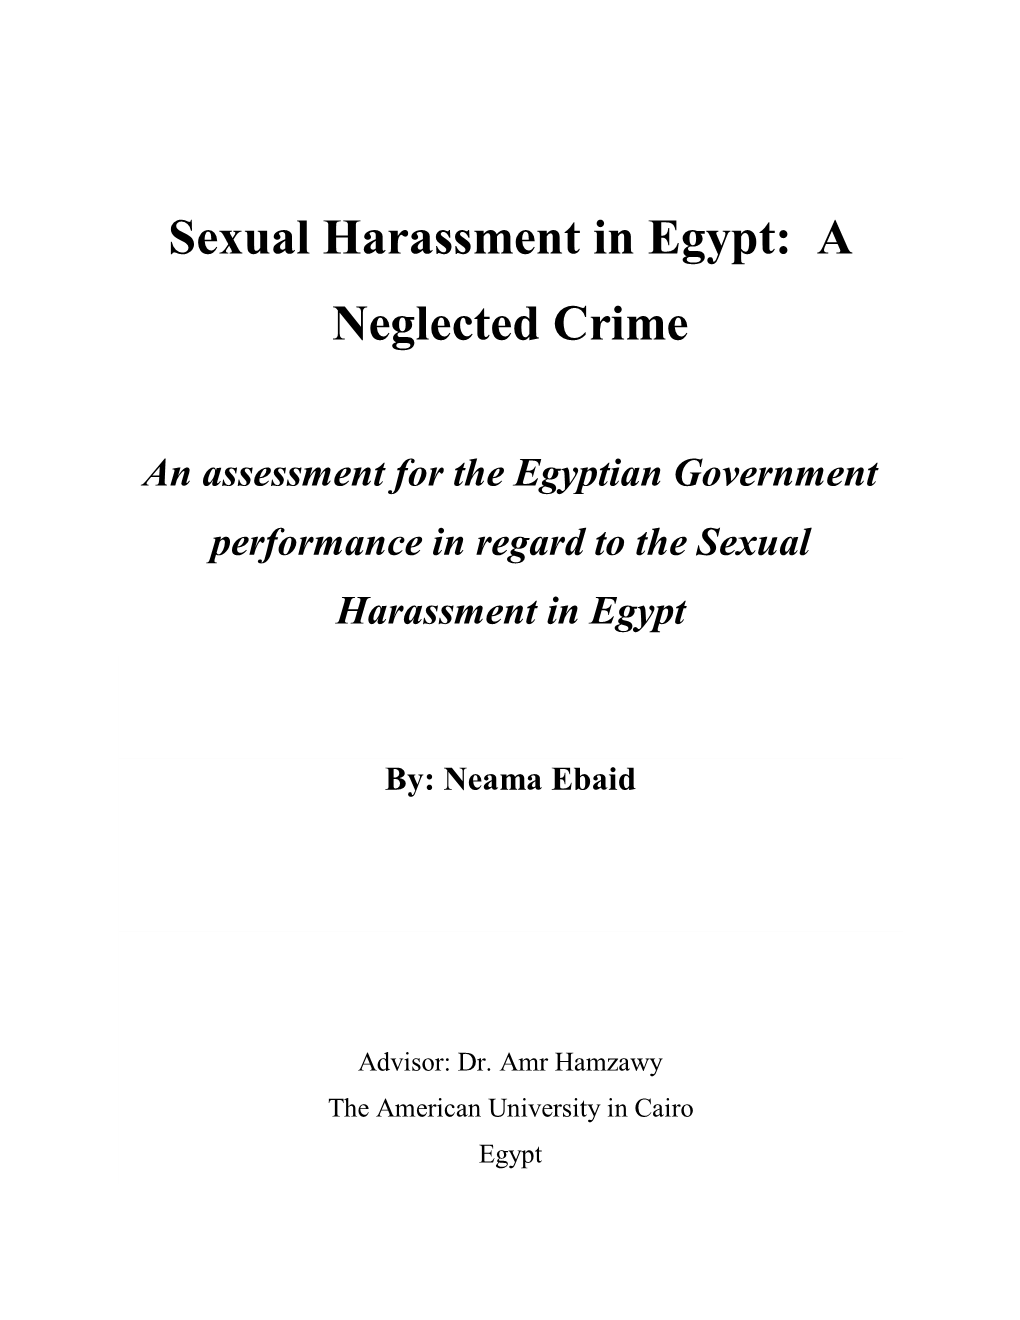 Sexual Harassment in Egypt: a Neglected Crime